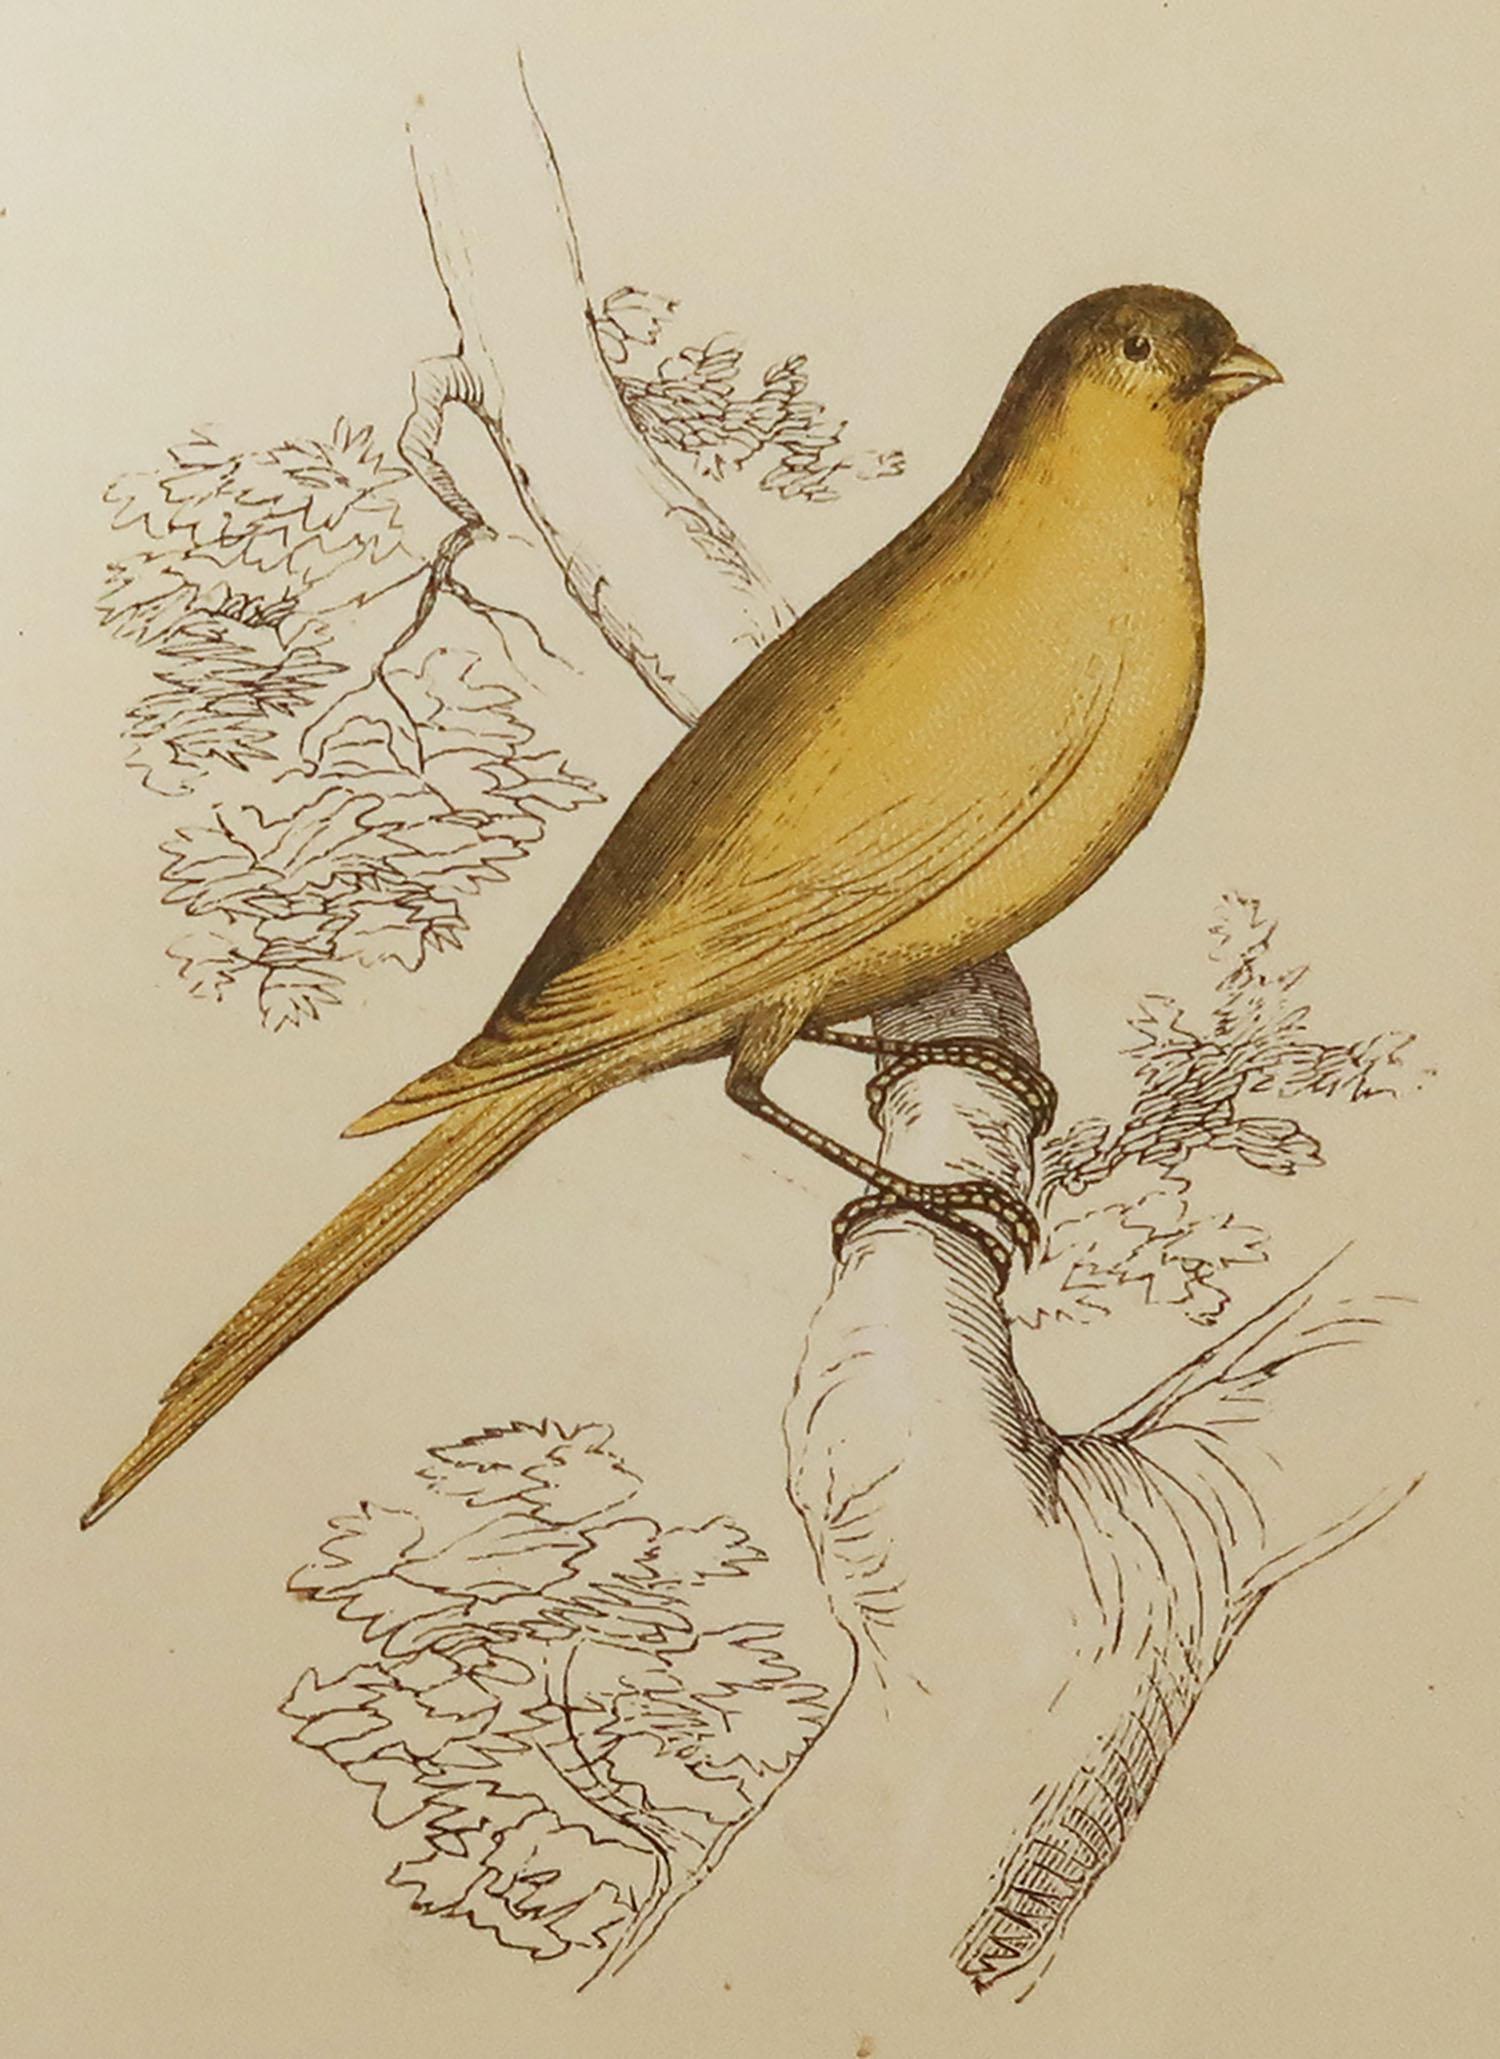 Great image of a canary finch

Unframed. It gives you the option of perhaps making a set up using your own choice of frames.

Lithograph with original color.

Published by Tallis, circa 1850

Crudely inscribed title has been erased at the